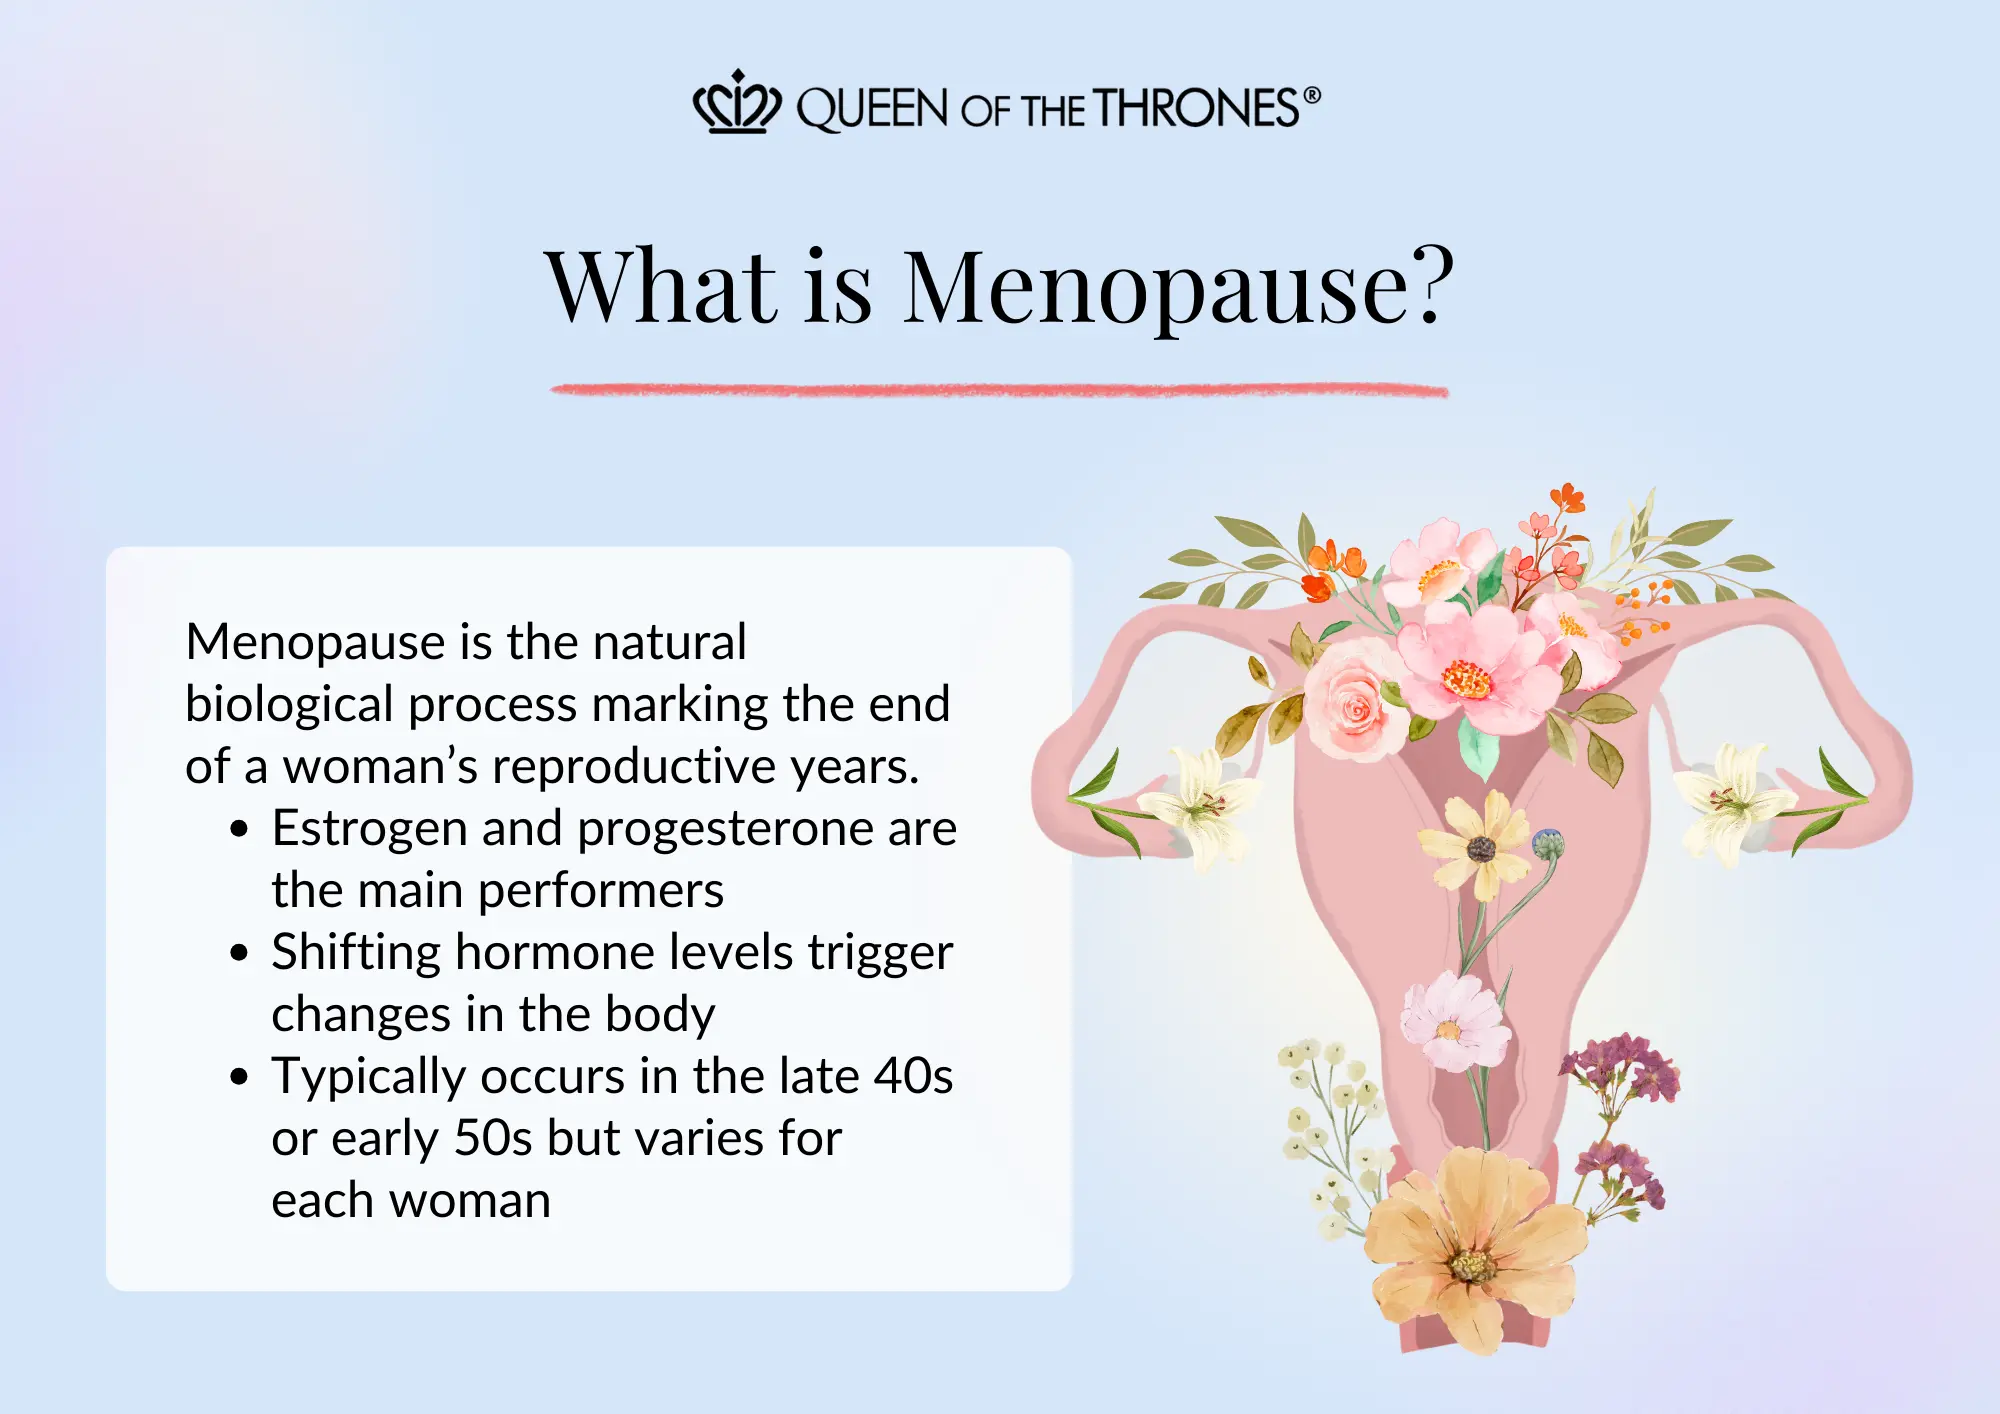 What is Menopause by Queen of the Thrones